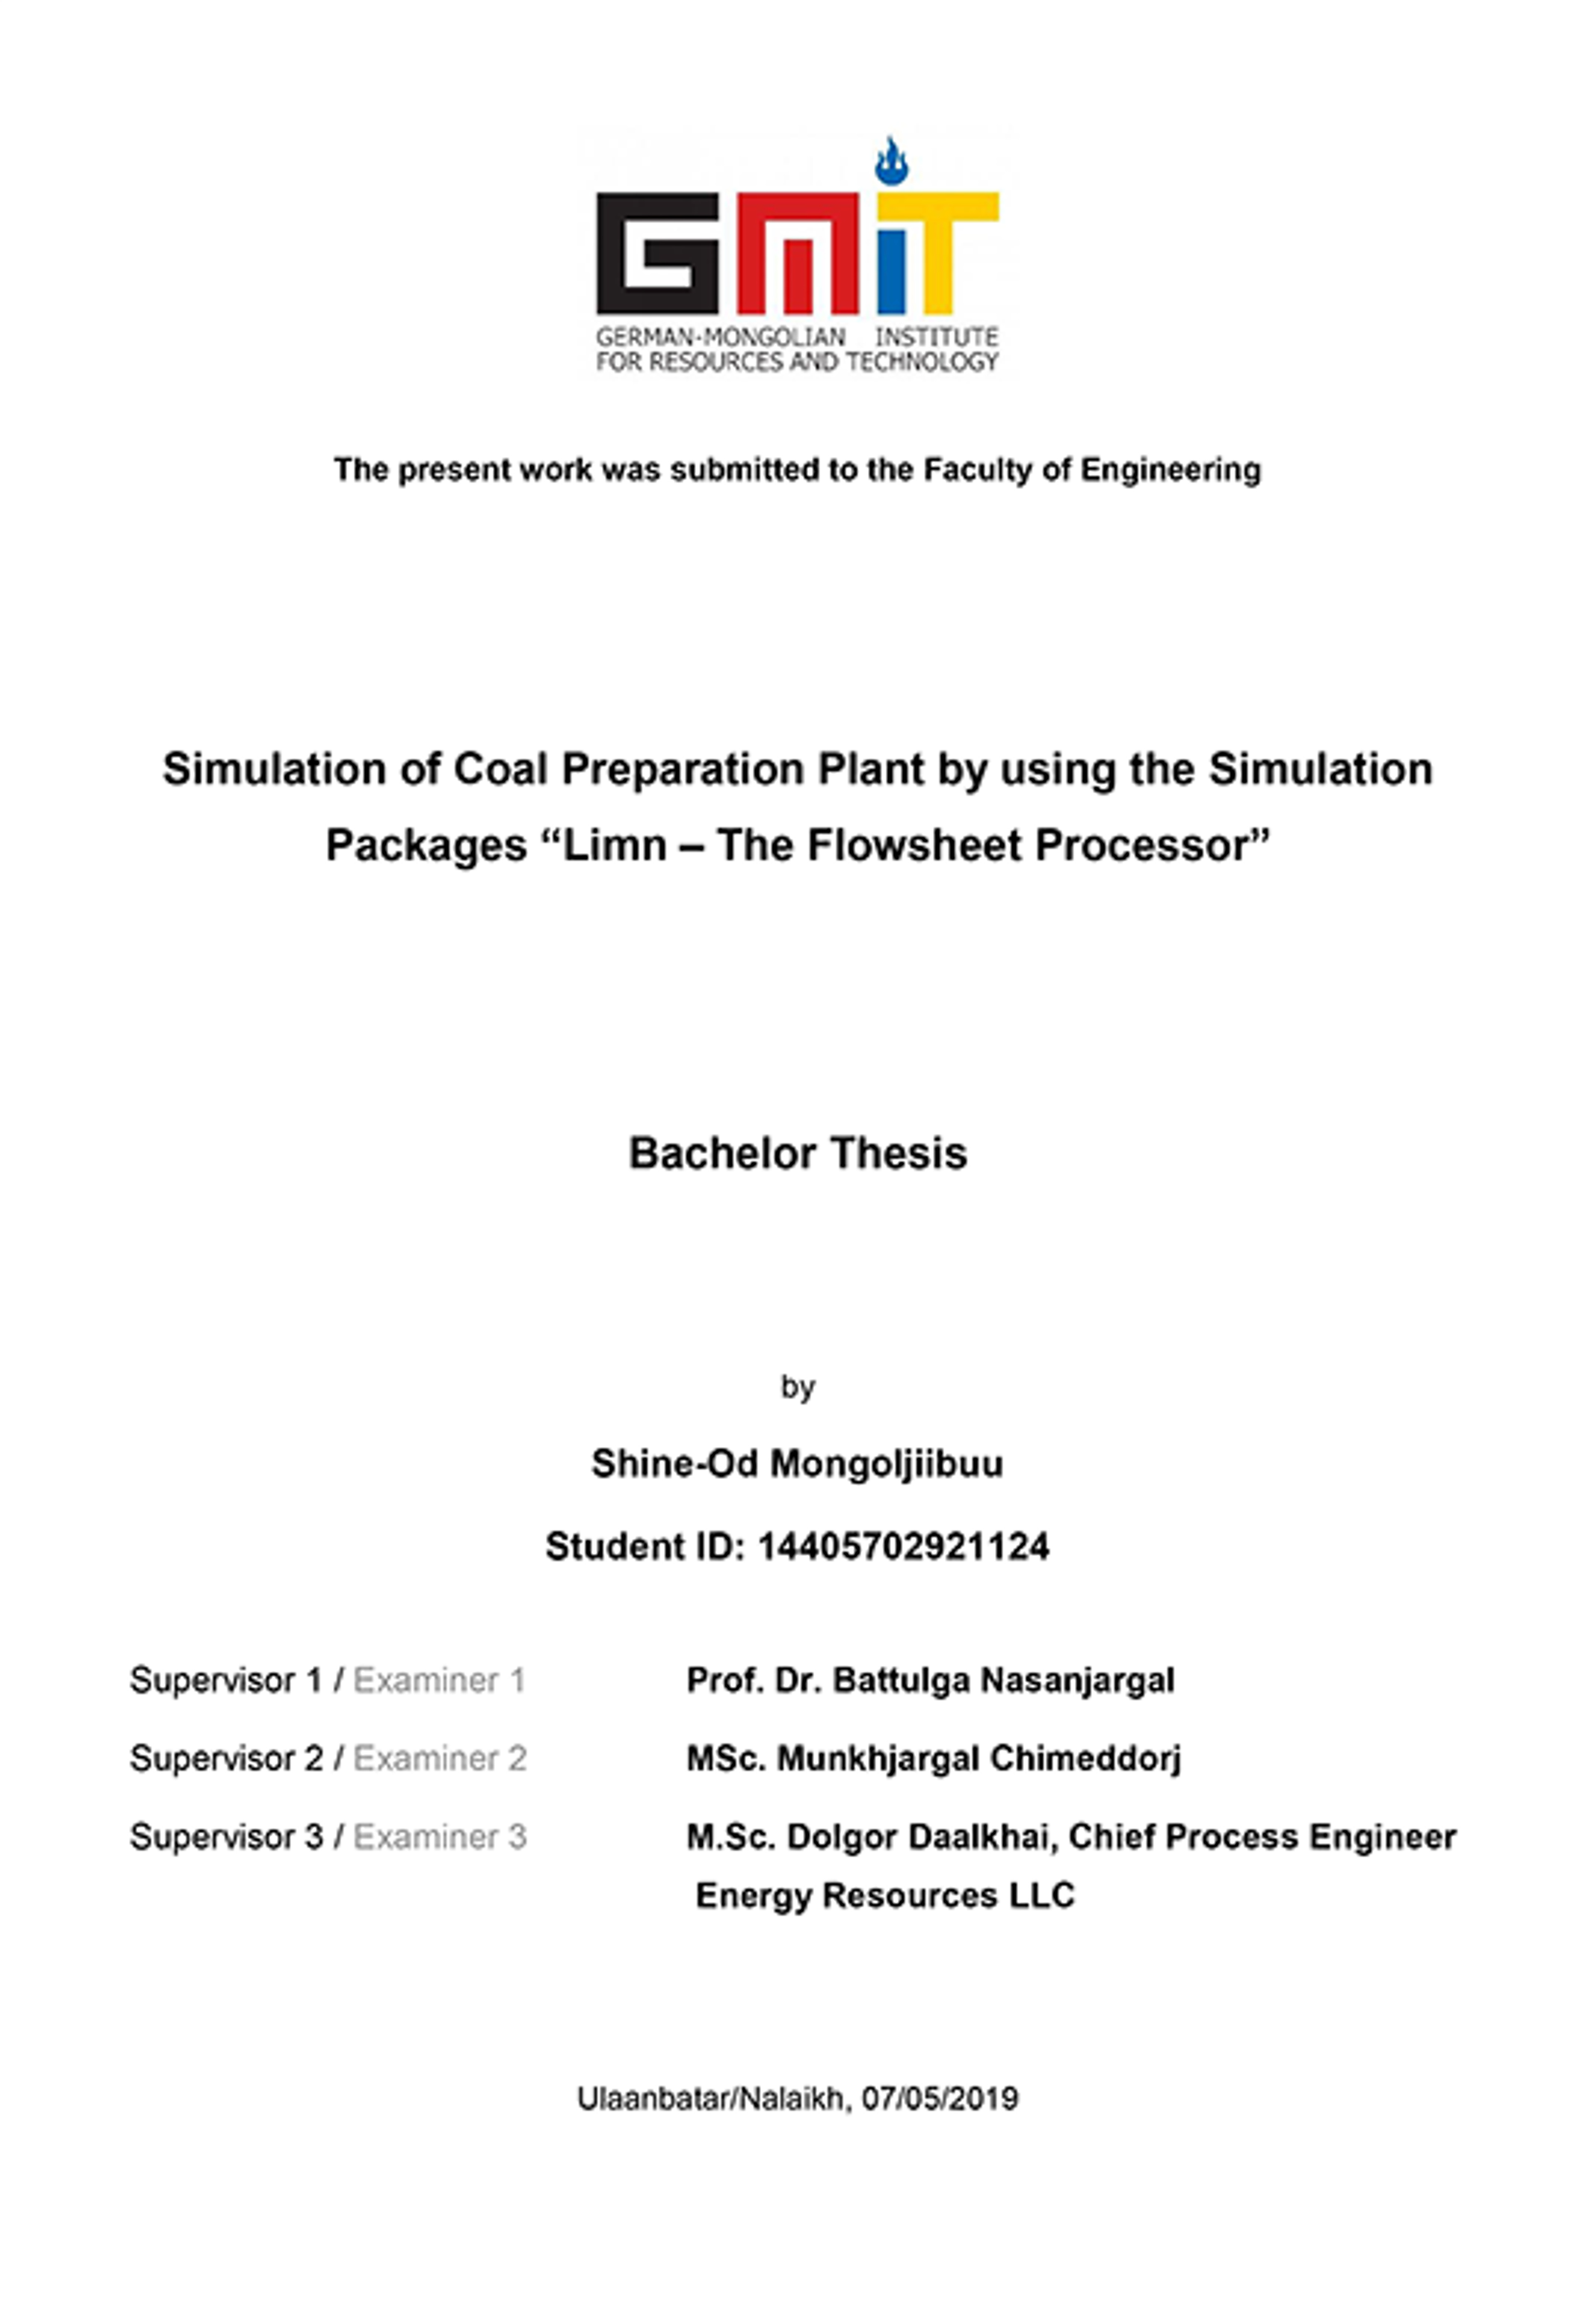 Simulation of Coal Preparation Plant by using the Simulation Packages “Limn – The Flowsheet Processor”